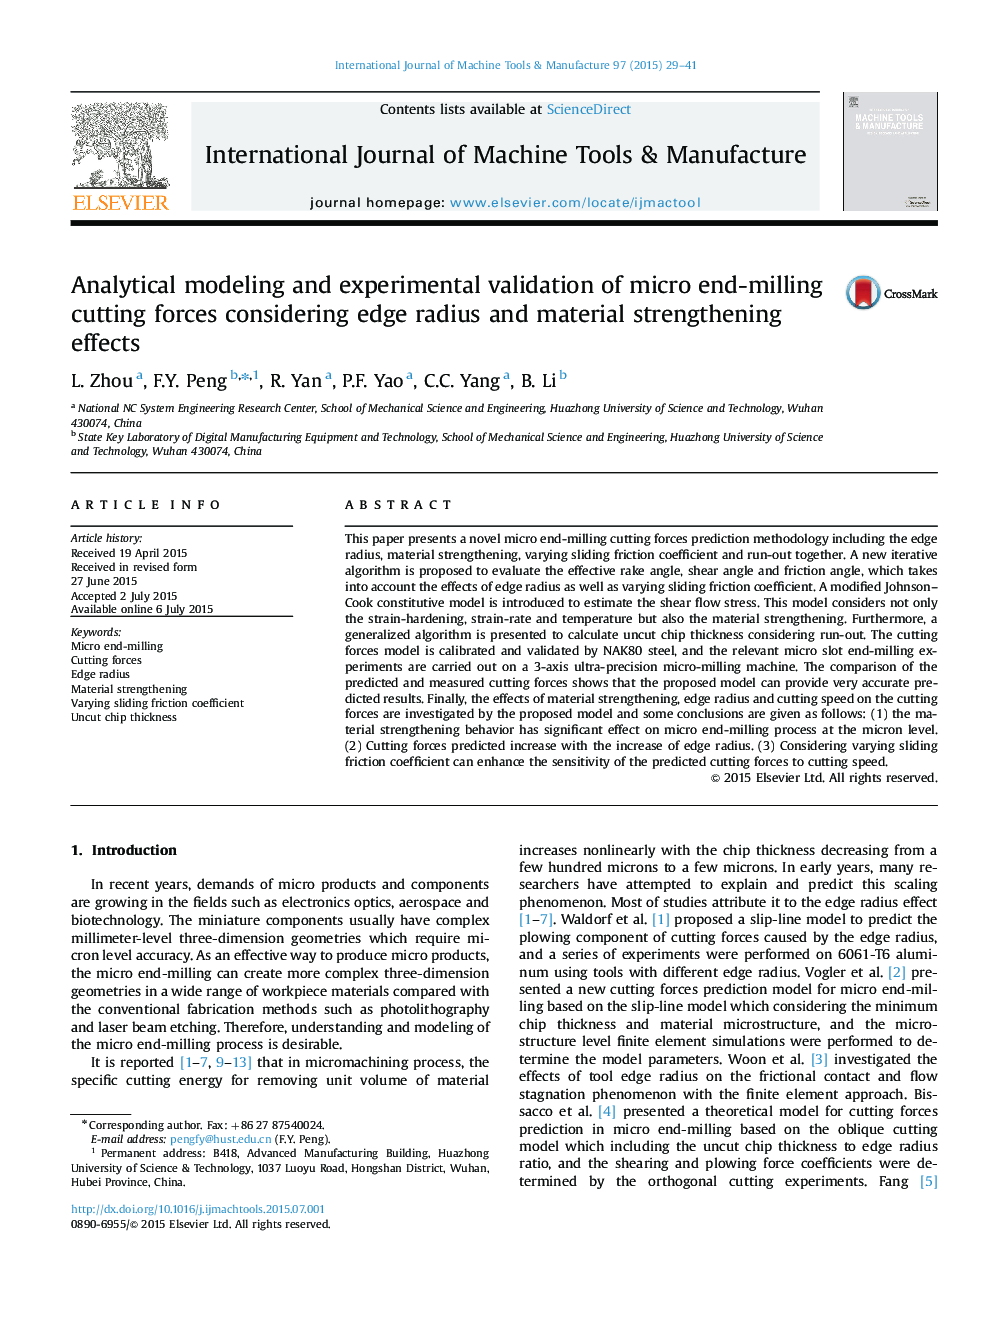 Analytical modeling and experimental validation of micro end-milling cutting forces considering edge radius and material strengthening effects